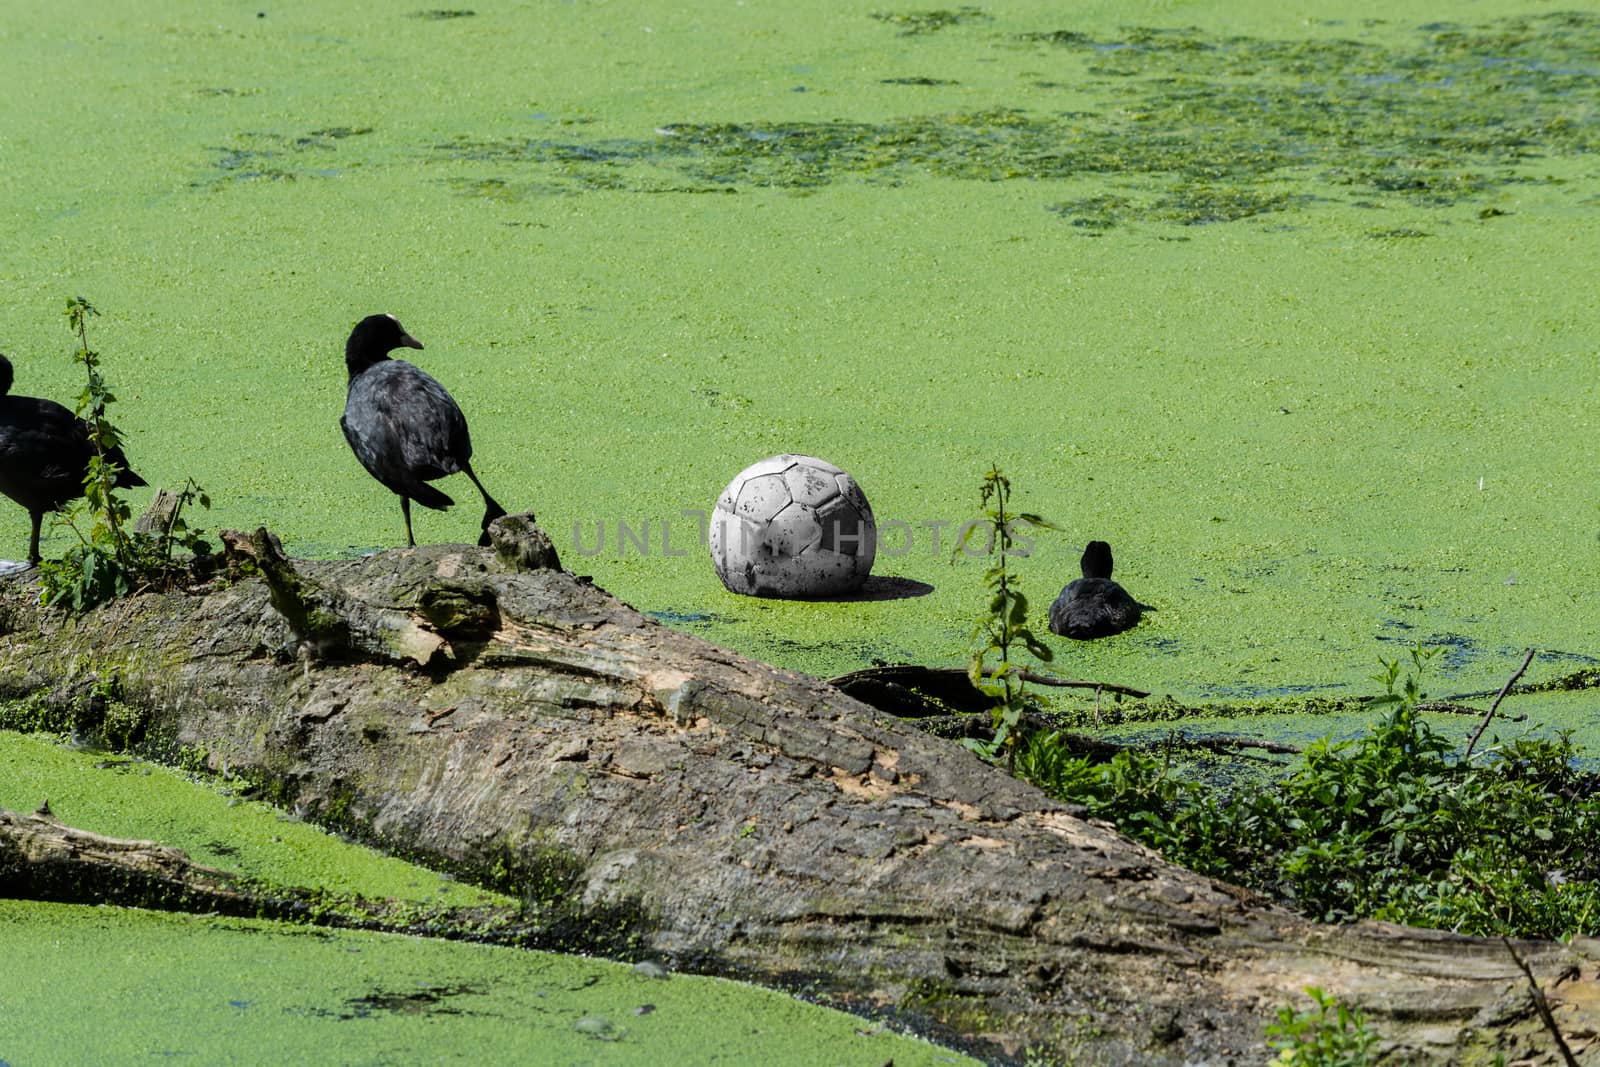 Ducks and soccer ball in a pond  by JFsPic